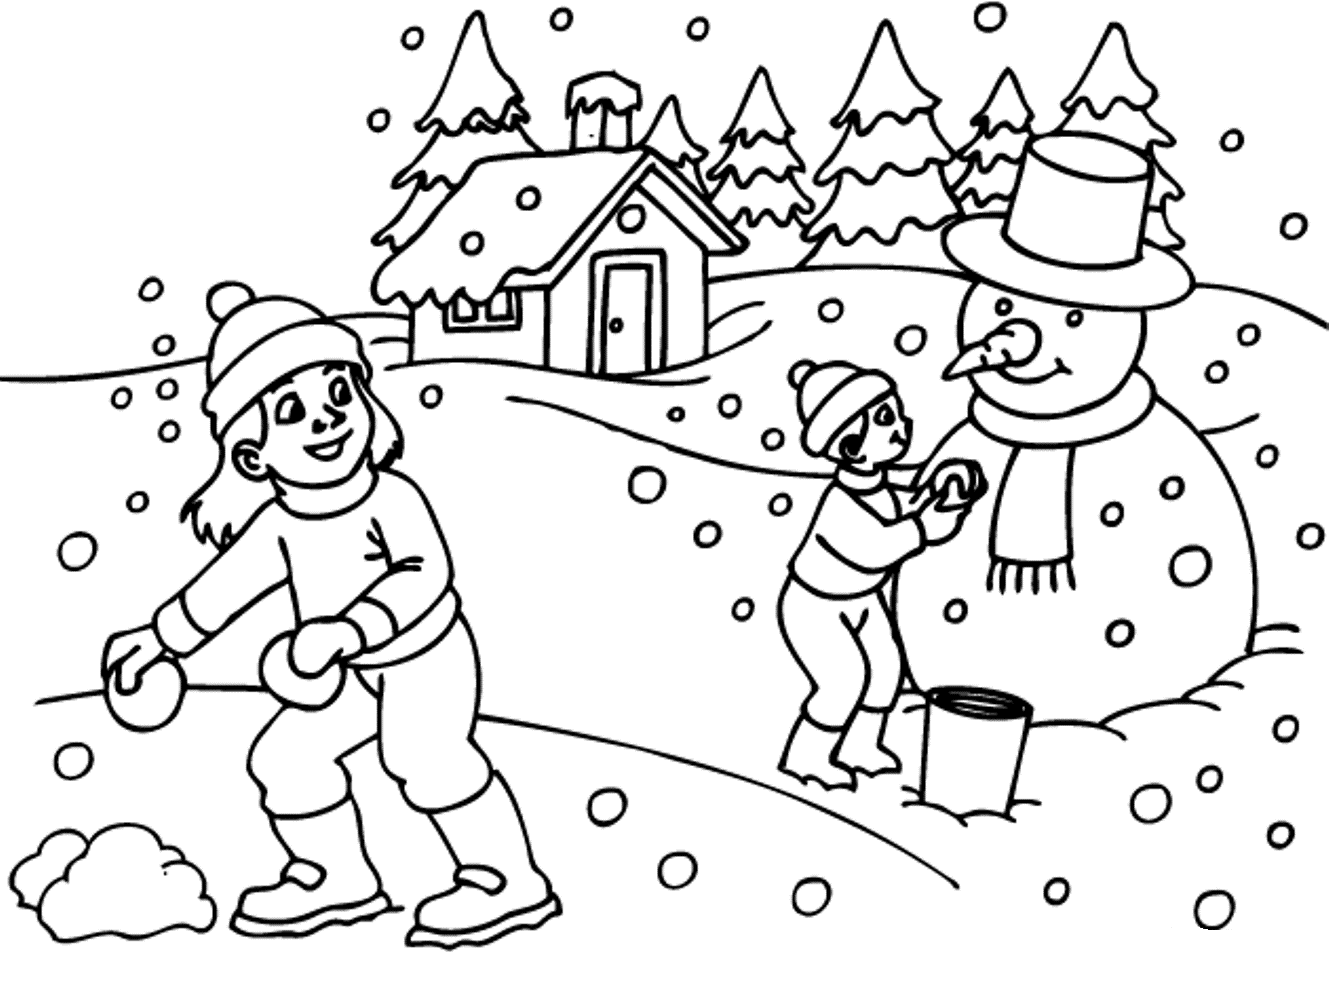 snow coloring page winter season coloring pages crafts and worksheets for coloring page snow 